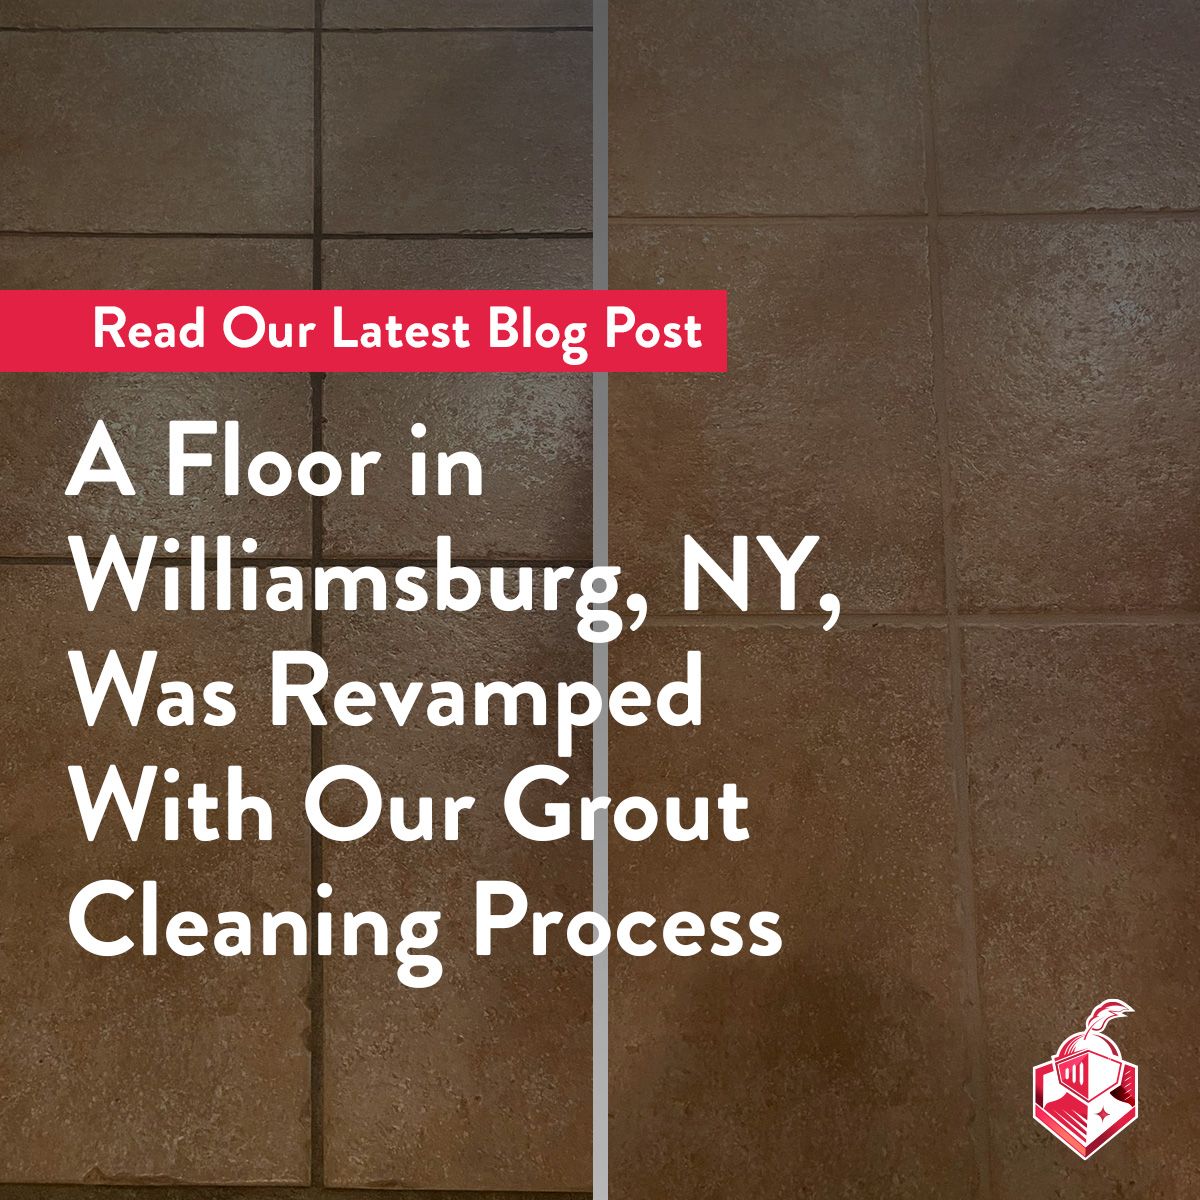 A Floor in Williamsburg, NY, Was Revamped With Our Grout Cleaning Process